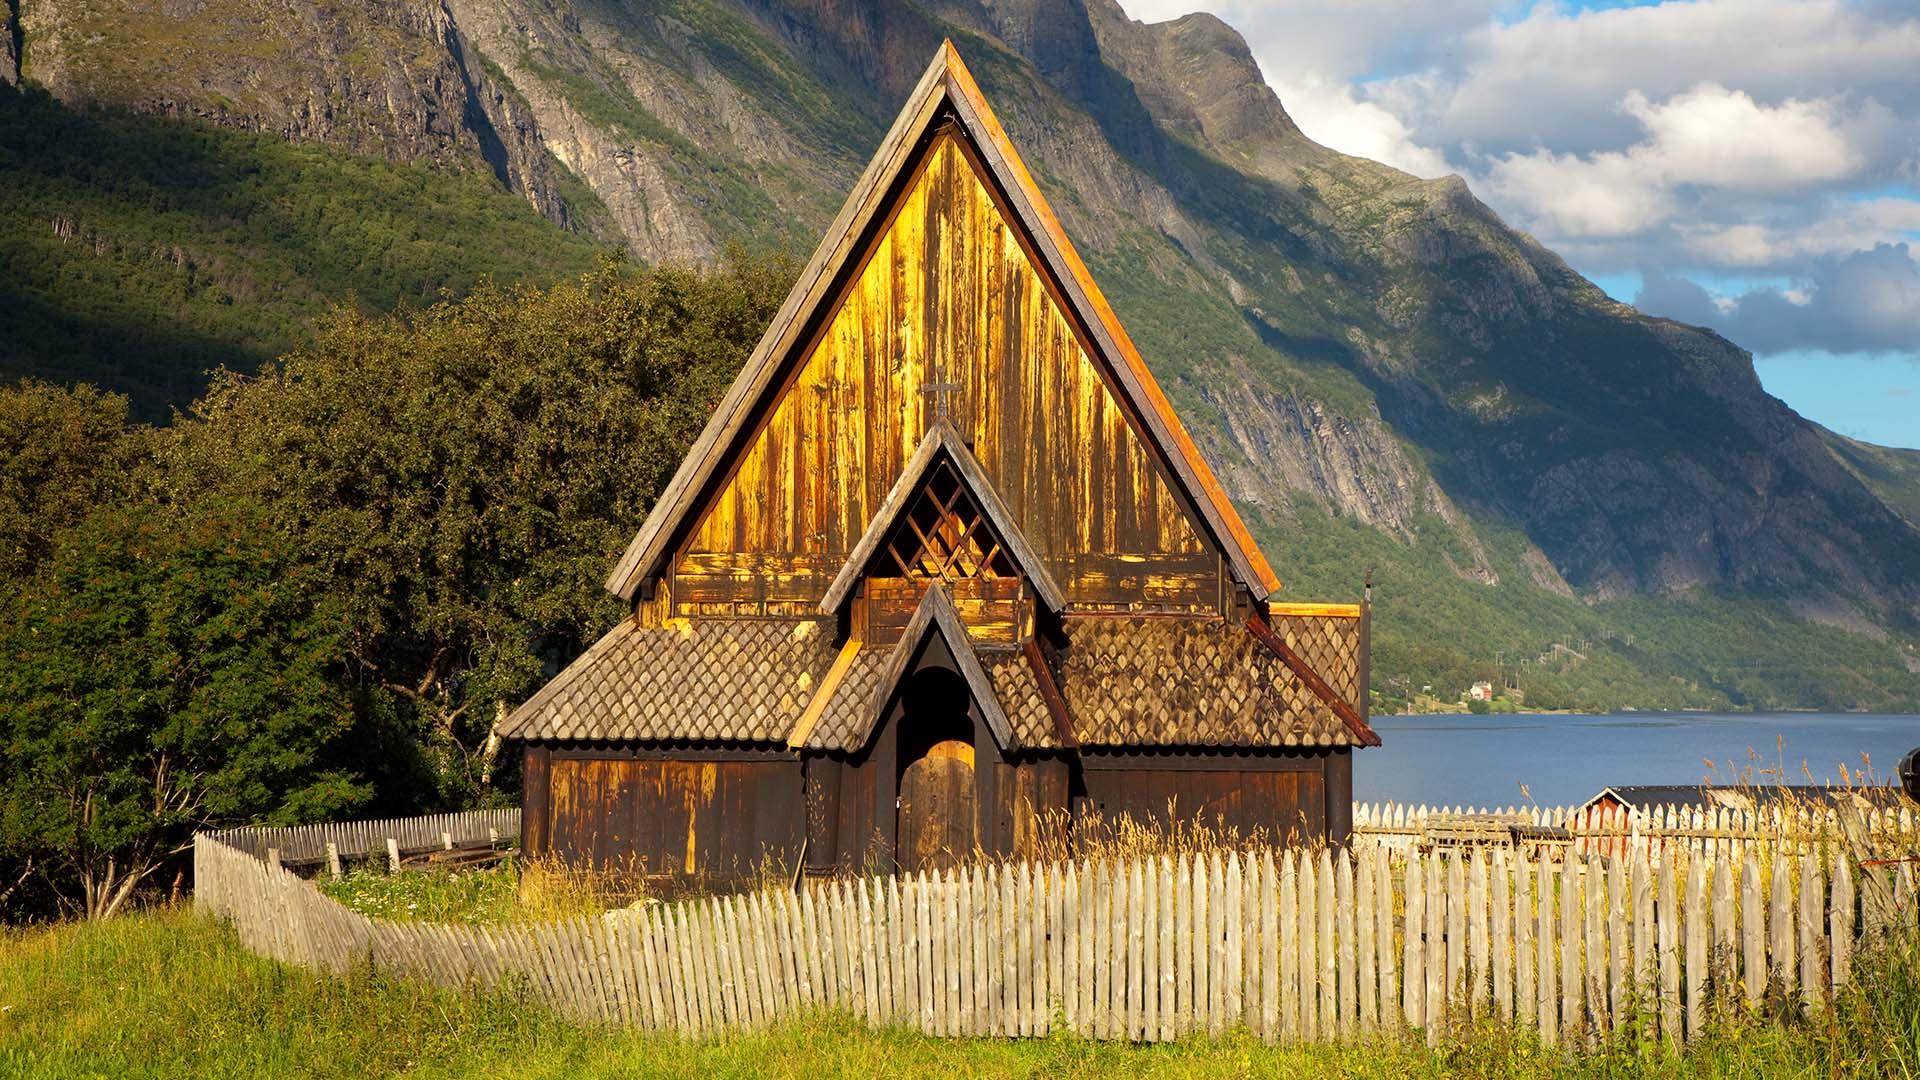 A small wooden stave church with a triangular form fenced in on a green field with a lake and steep hillsides beyond.